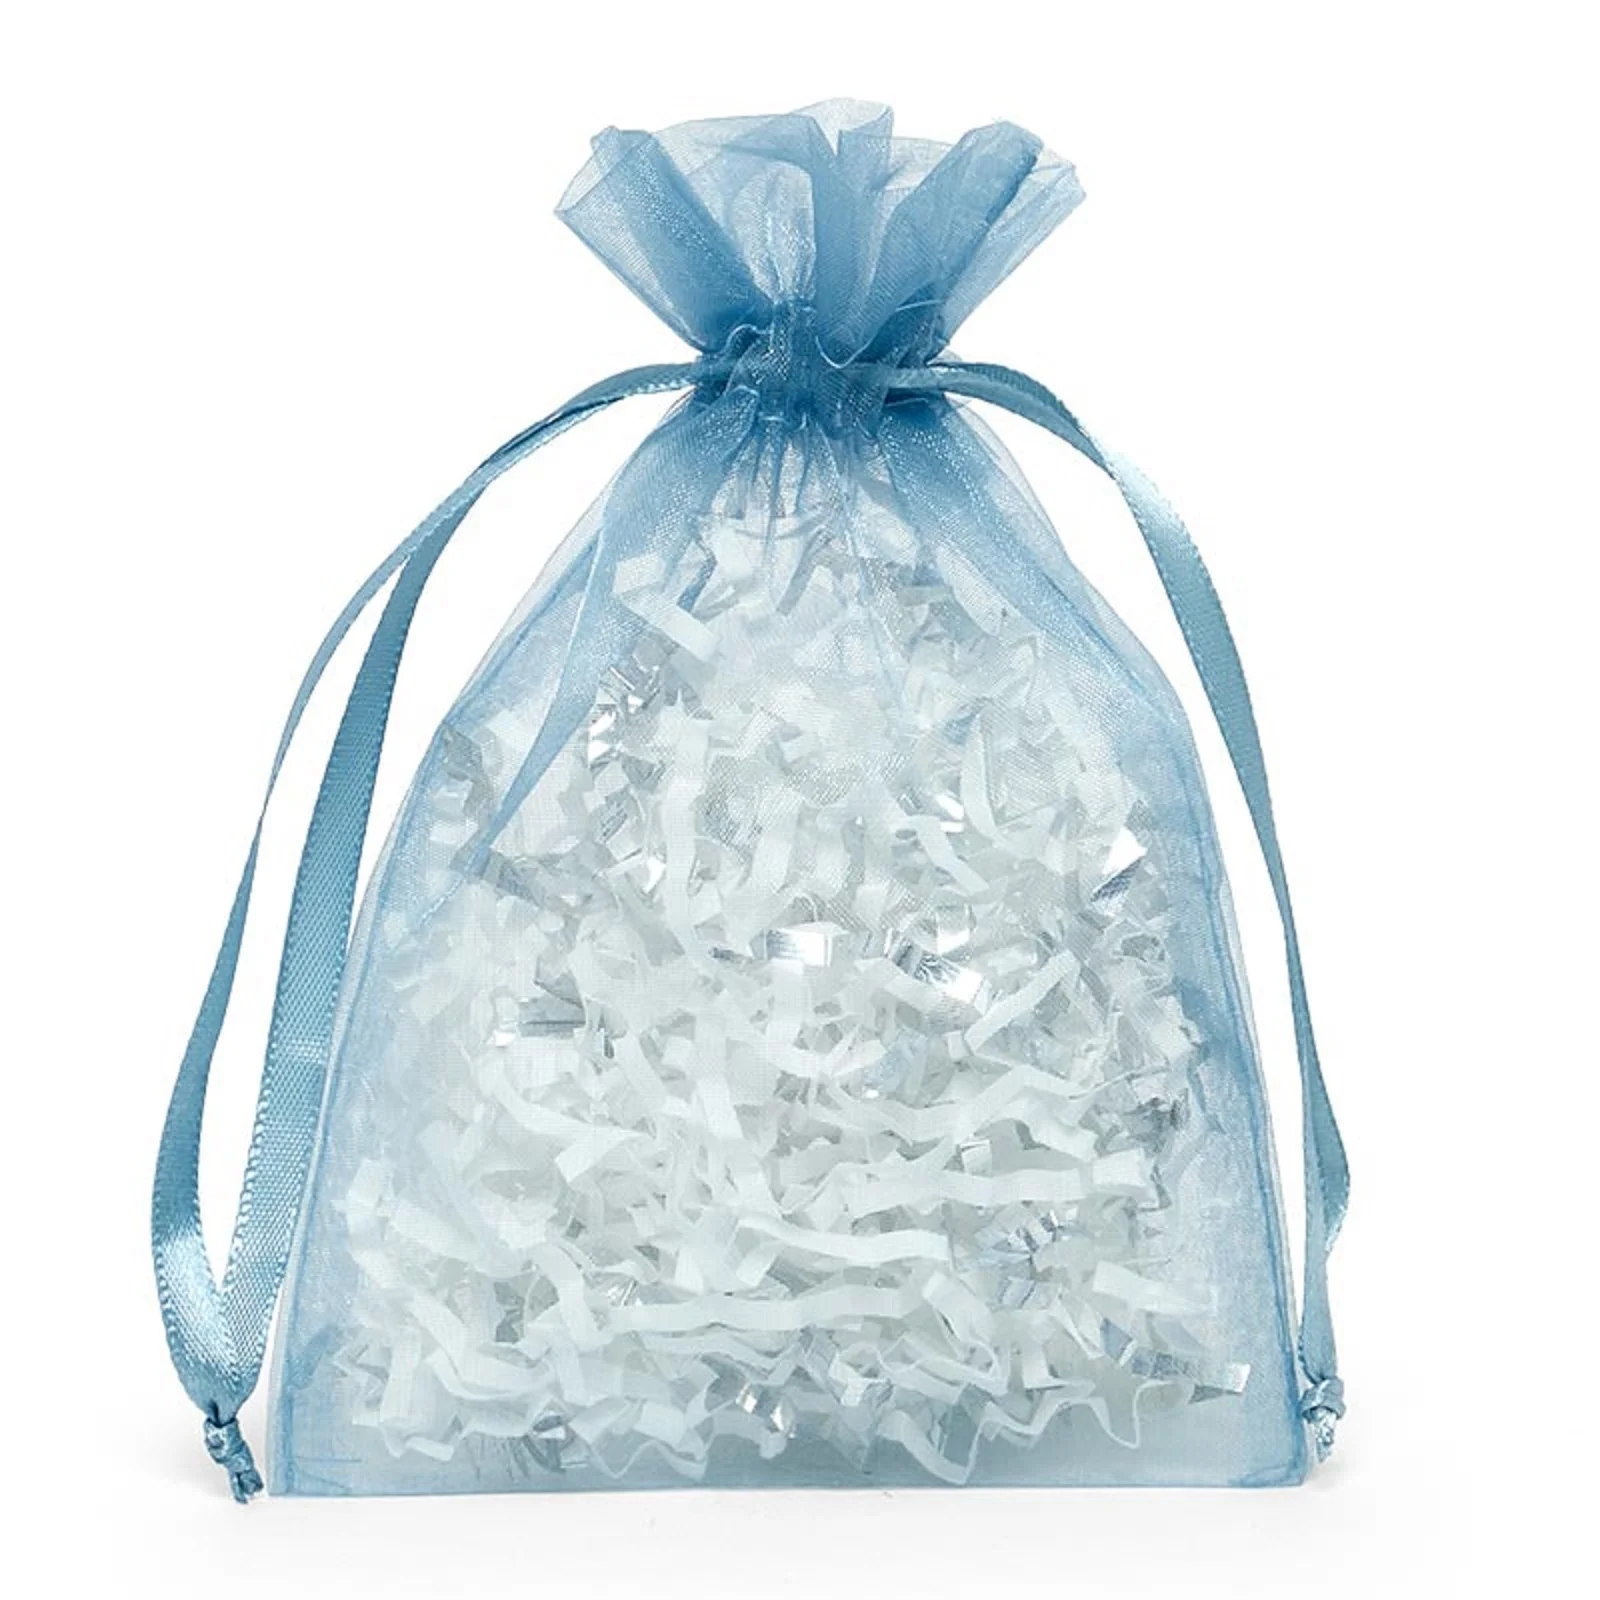 Premium Quality Smoke Blue Organza Jewelry and Gift Packaging Pouch in Stock